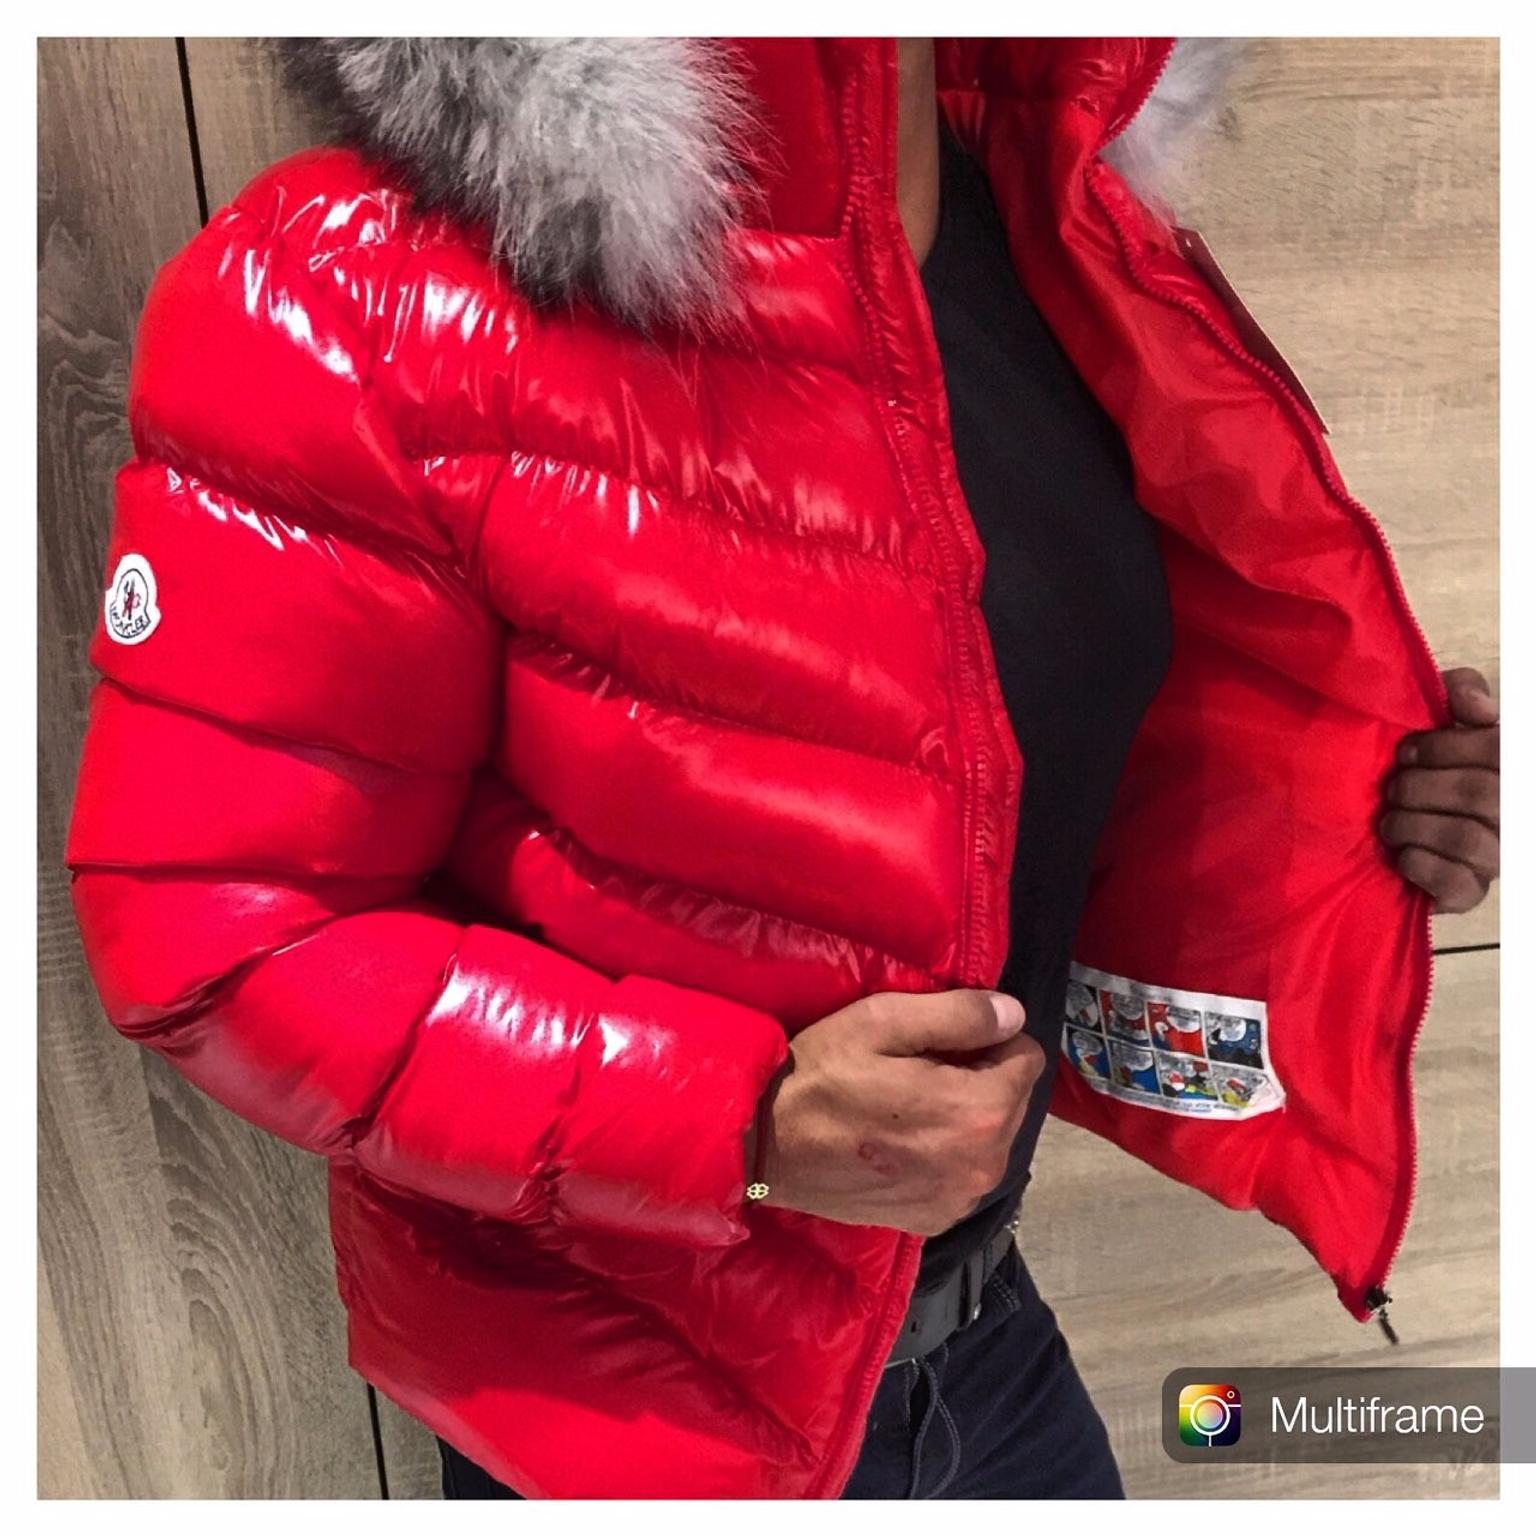 mens moncler with fur